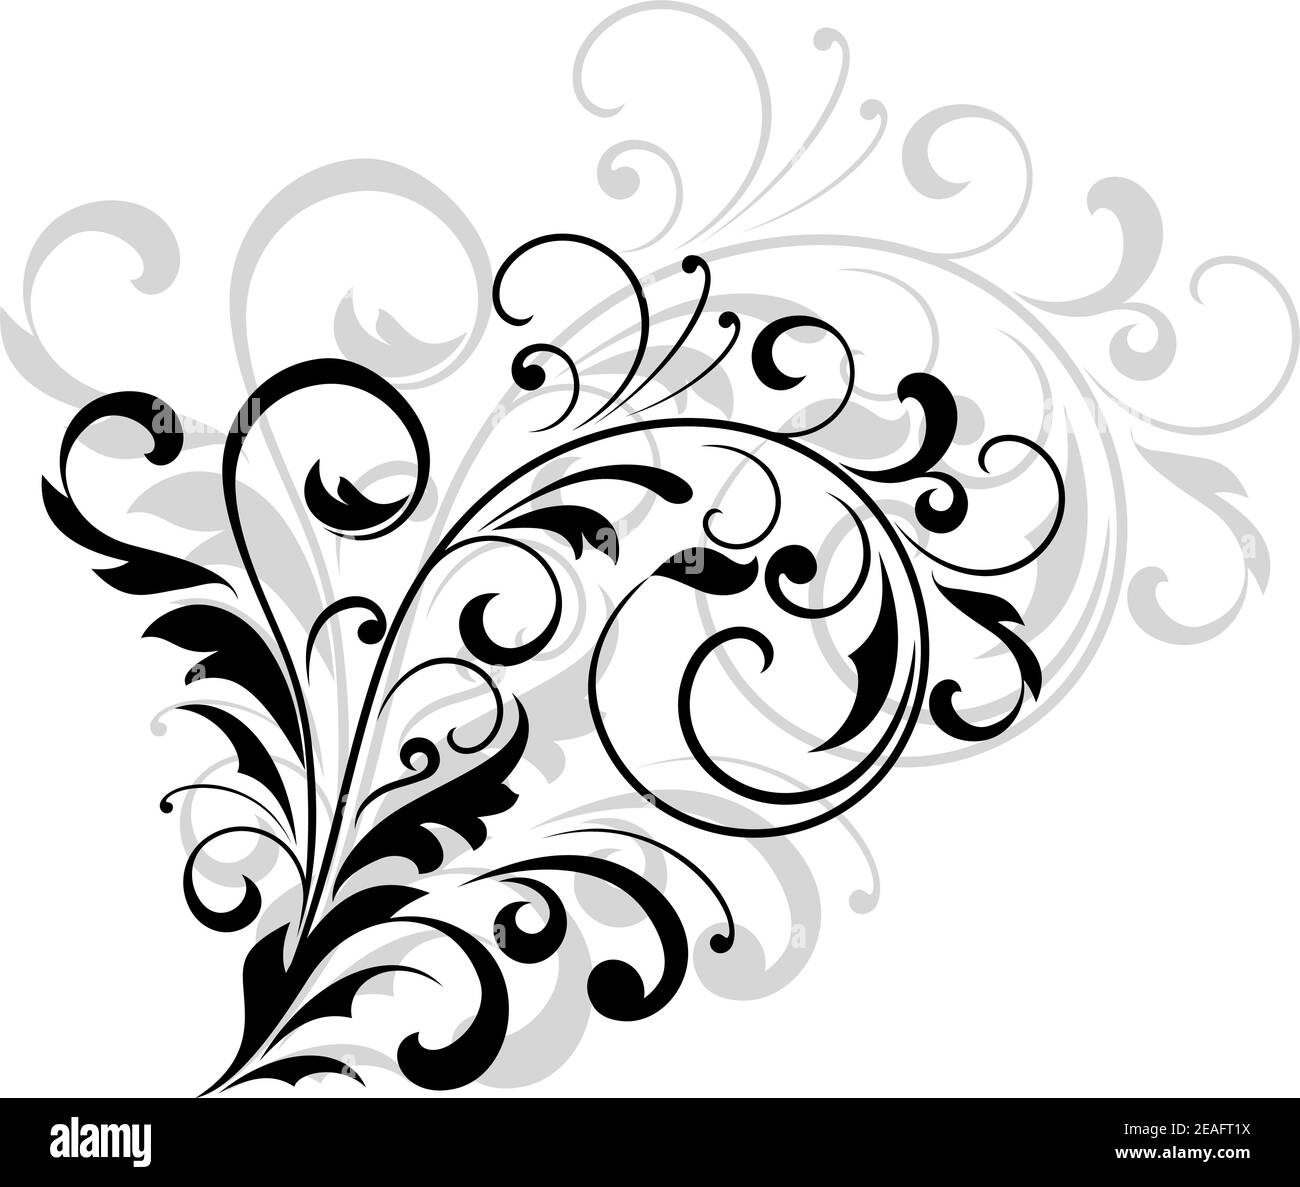 Floral design element with swirling leaves as a simple black silhouette with a grey enlarged repeat design behind on white Stock Vector